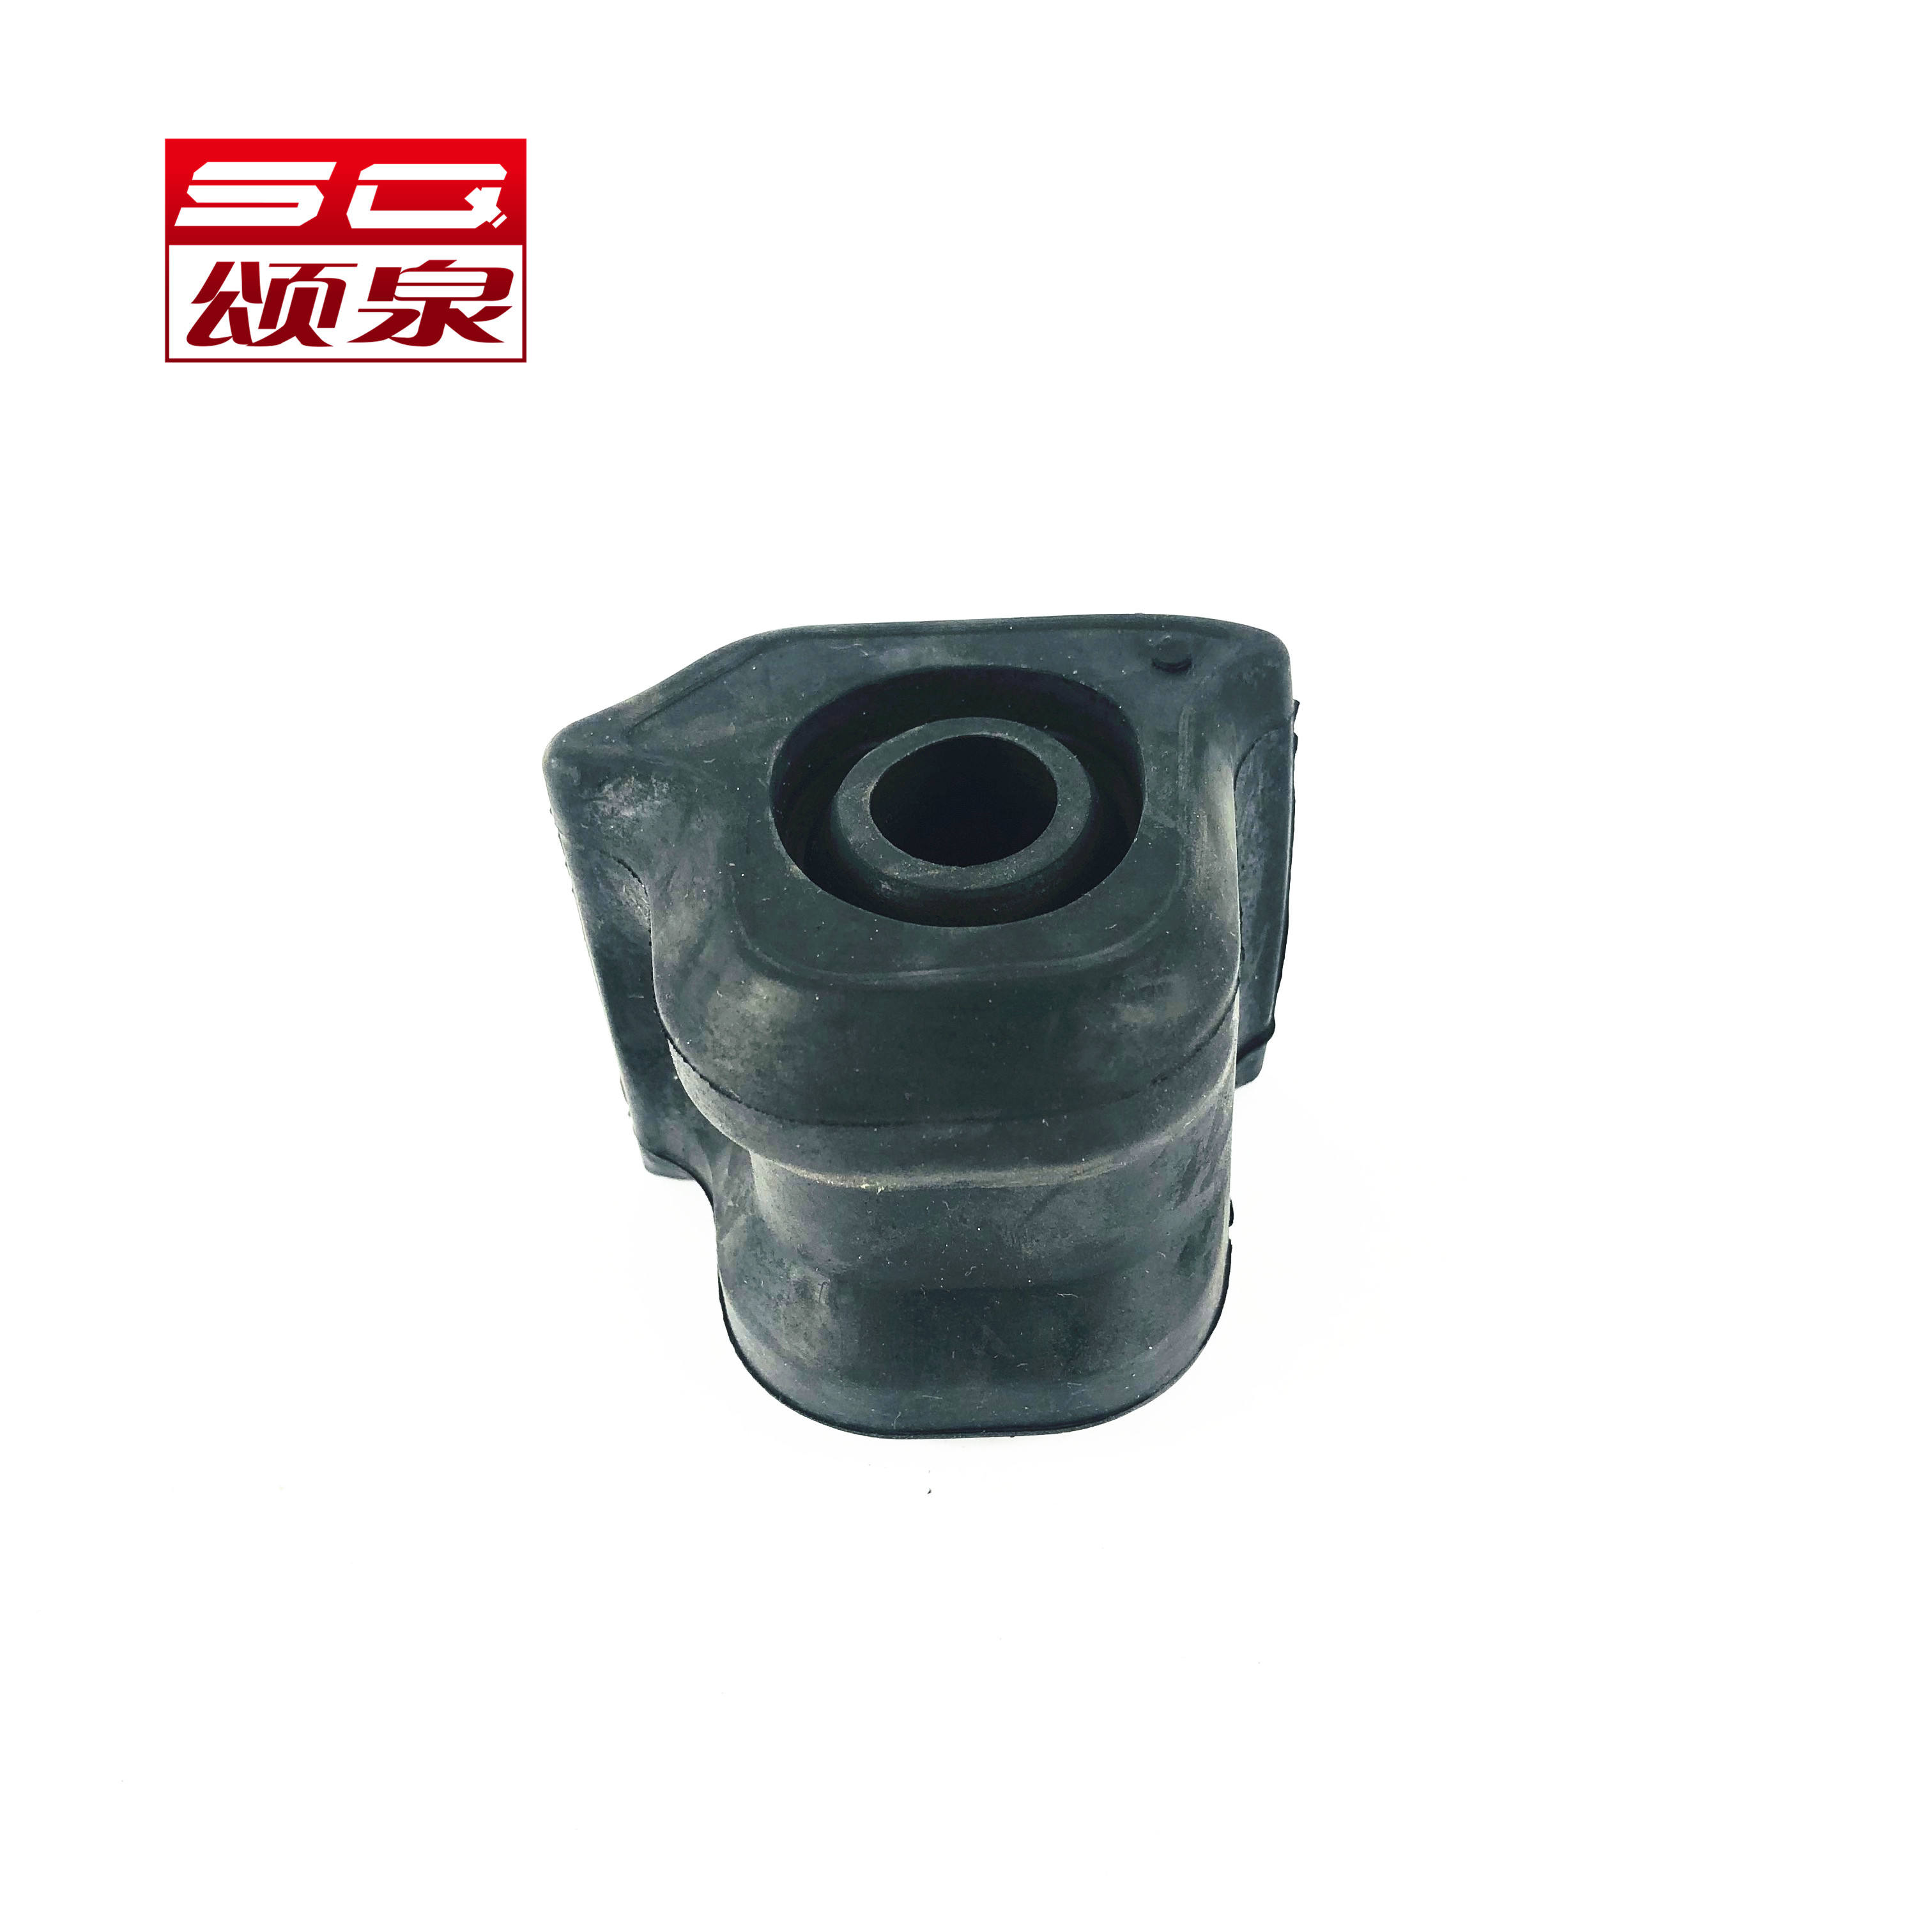 48815-42090 Front Stabilizer Bushing For Toyota RAV4 ACV33 Rubber Bushing High Quality Auto Parts